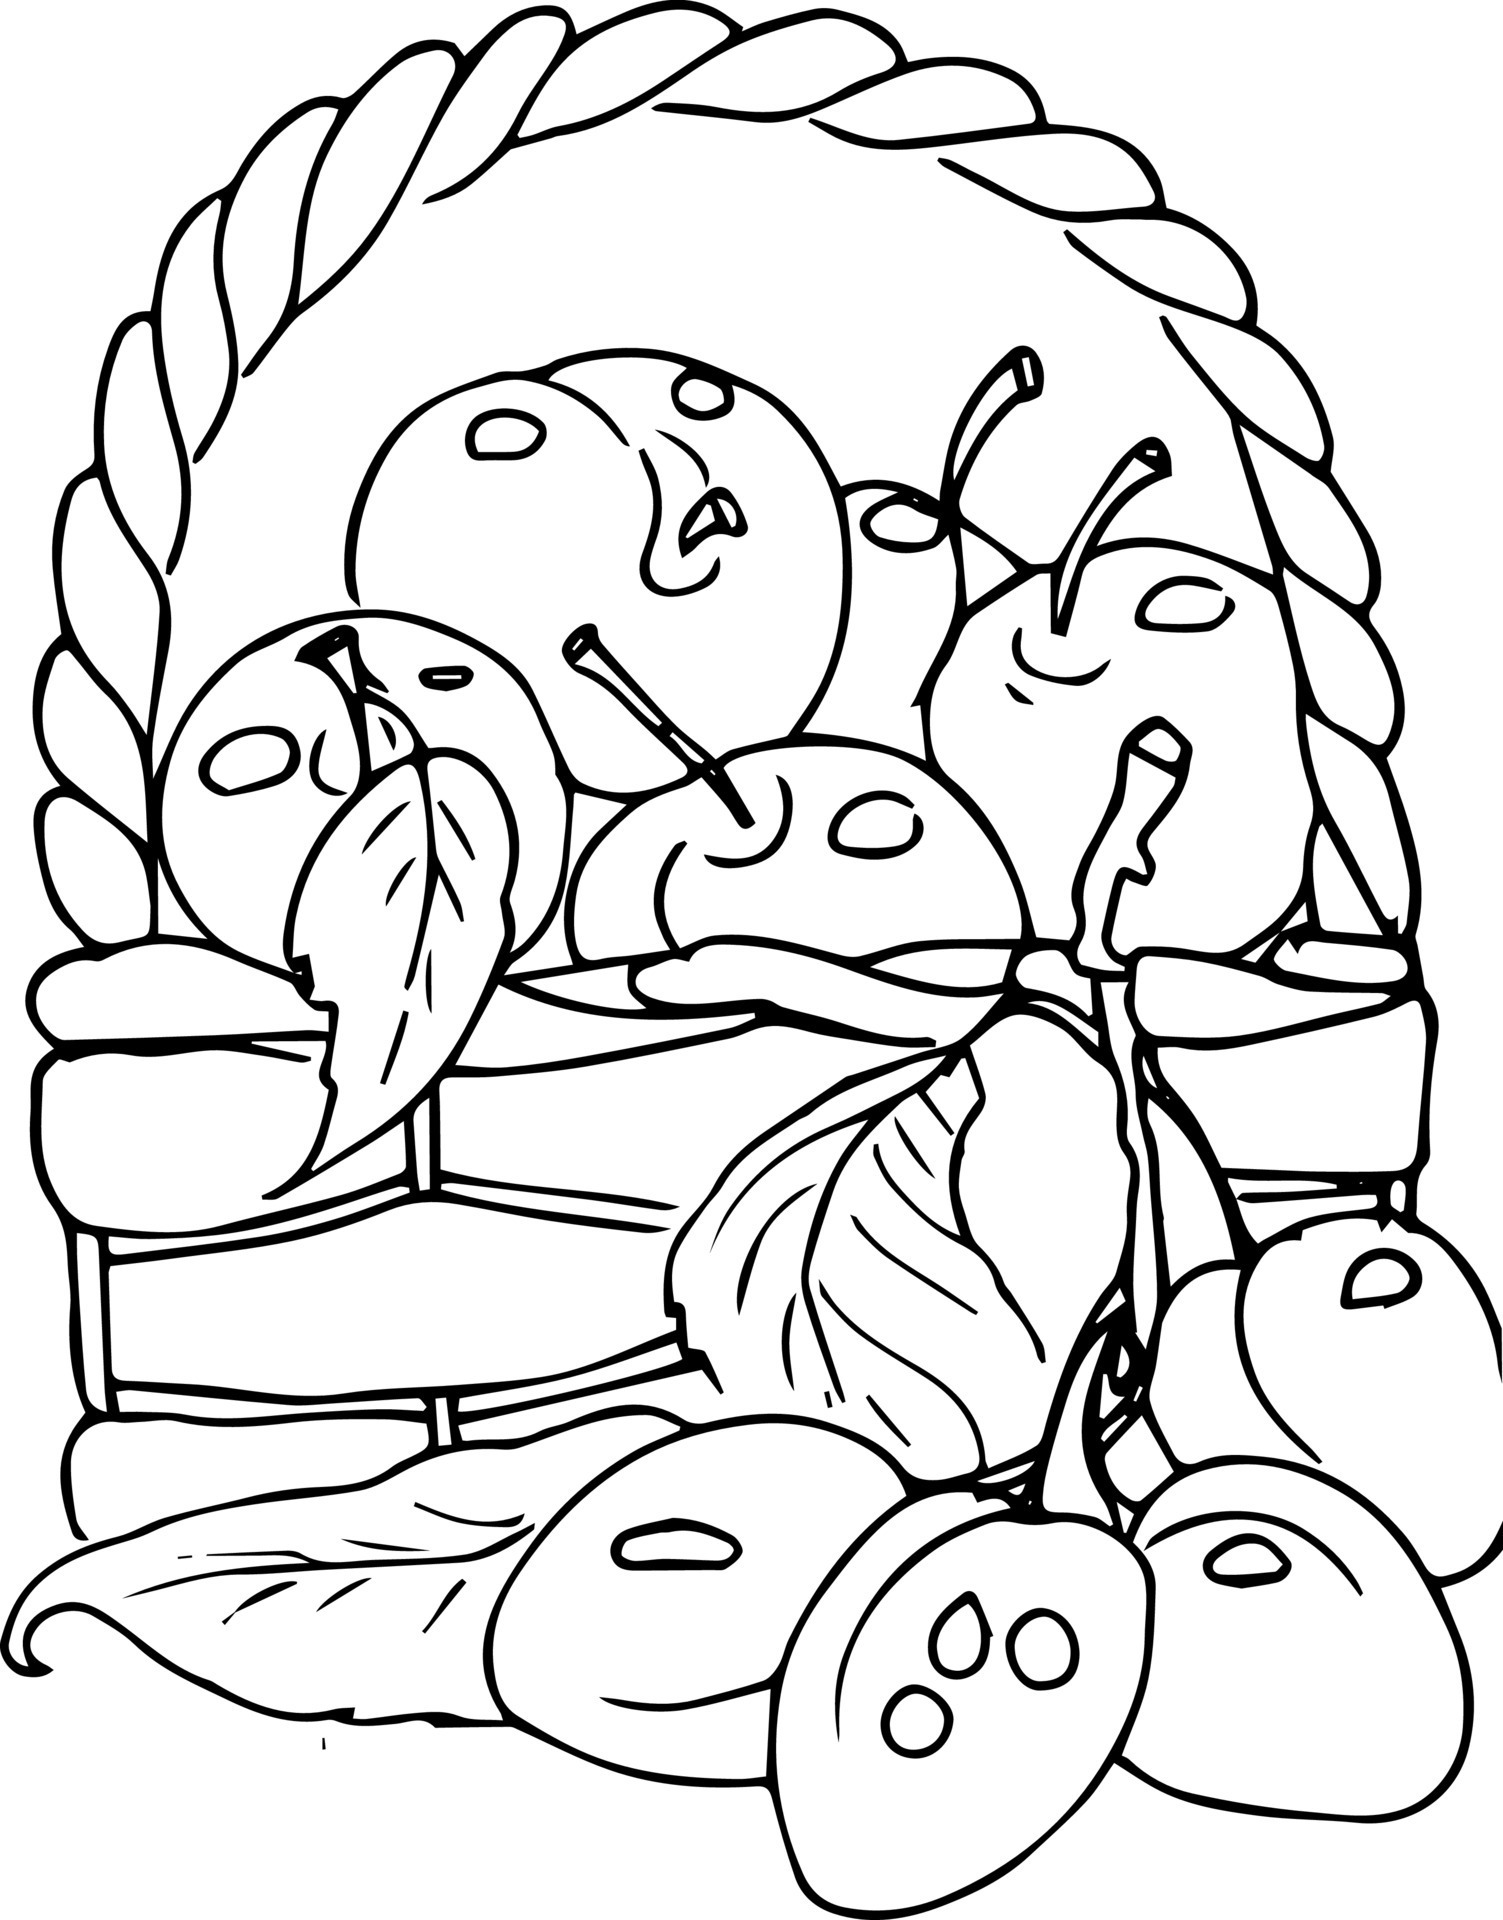 118+ Fruit Baskets Coloring Pages 118